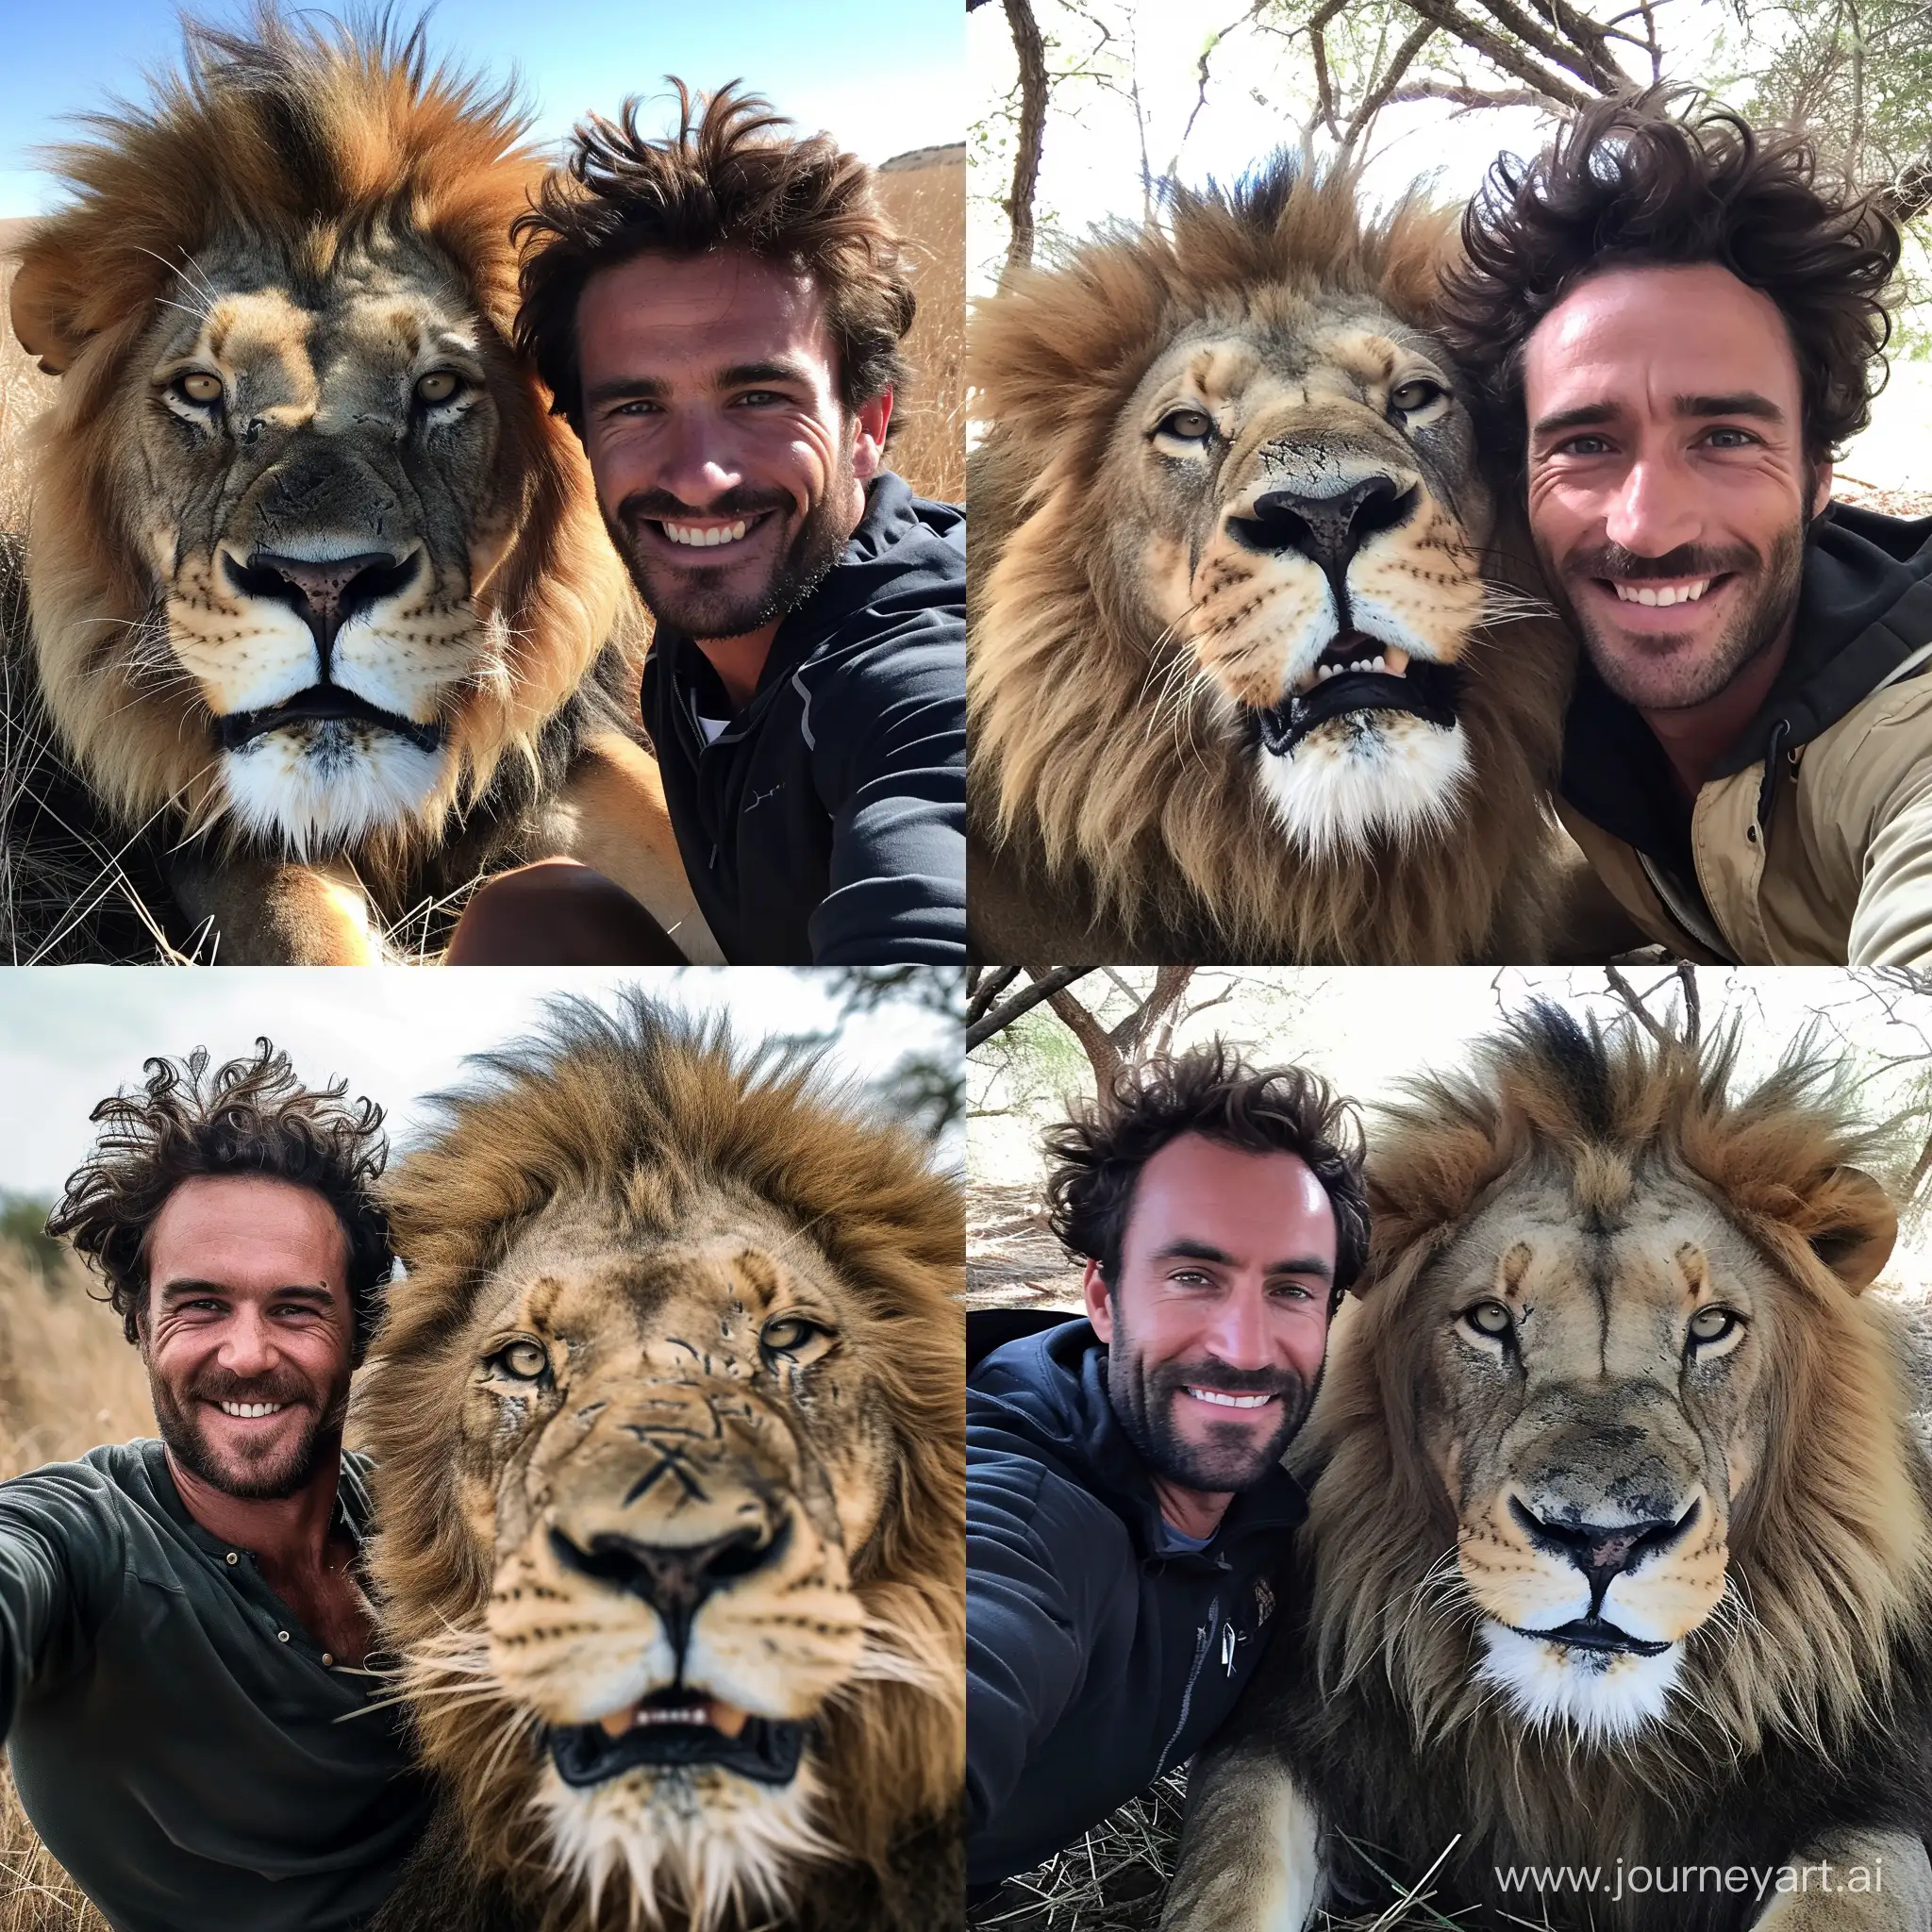 extreme dangerous life threatening viral insane selfie ever of man in his 20s with dangerous lion --v 6